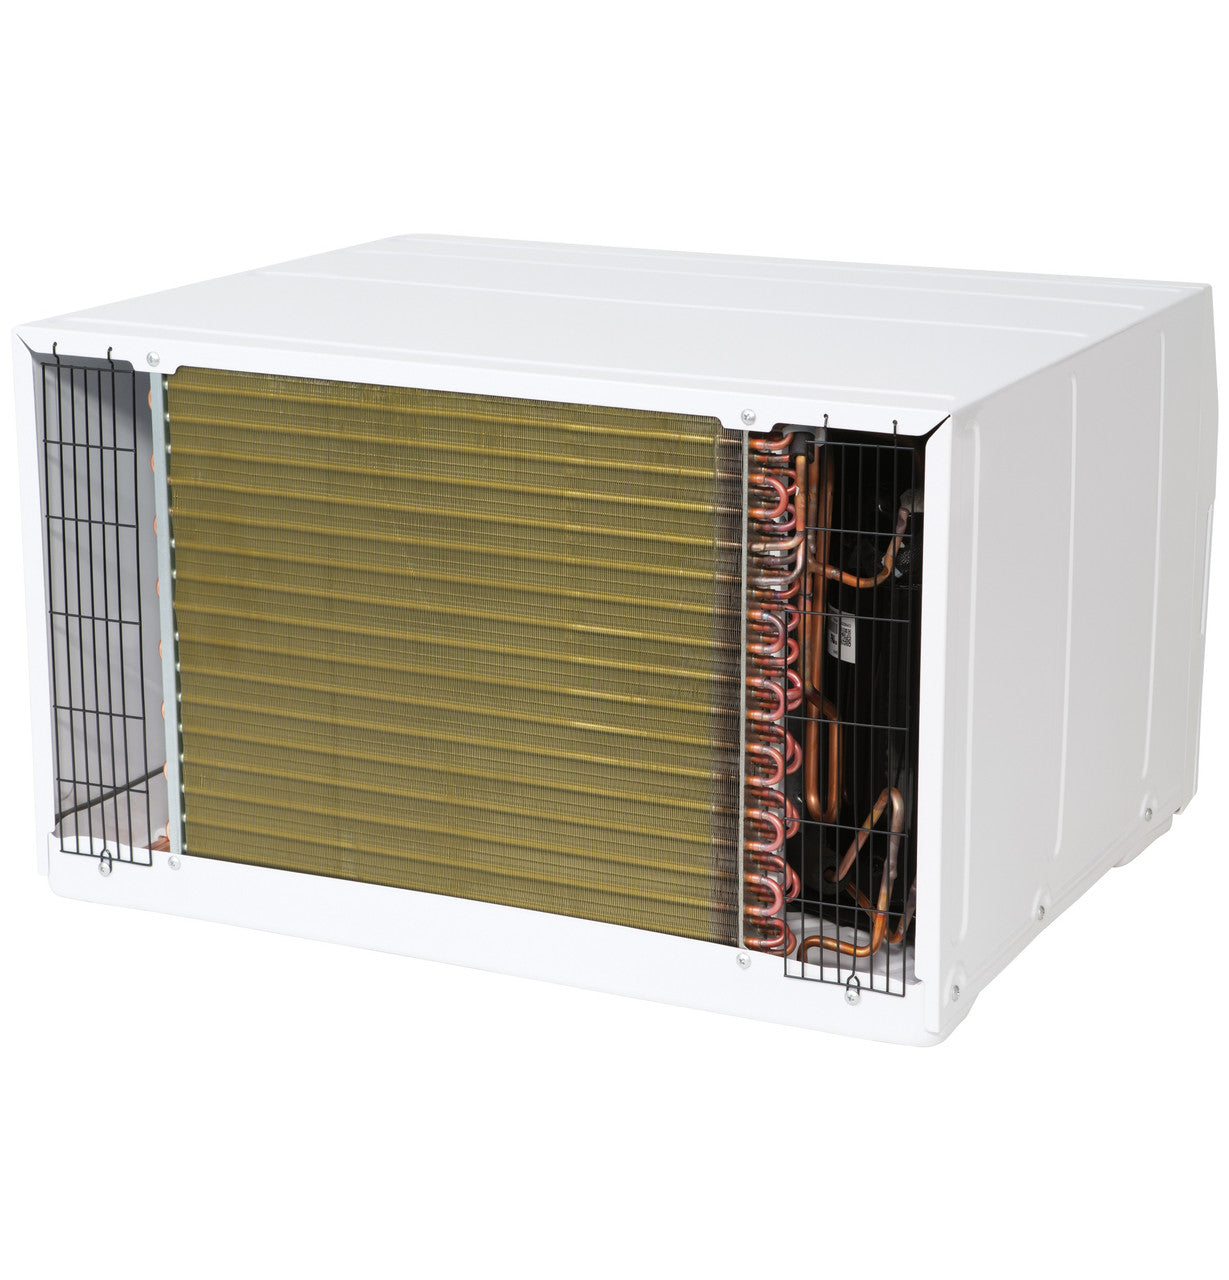 GE 8,000 BTU 115 Volt Through-the-Wall Air Conditioner: Cooling Only - AKCQ08ACJ